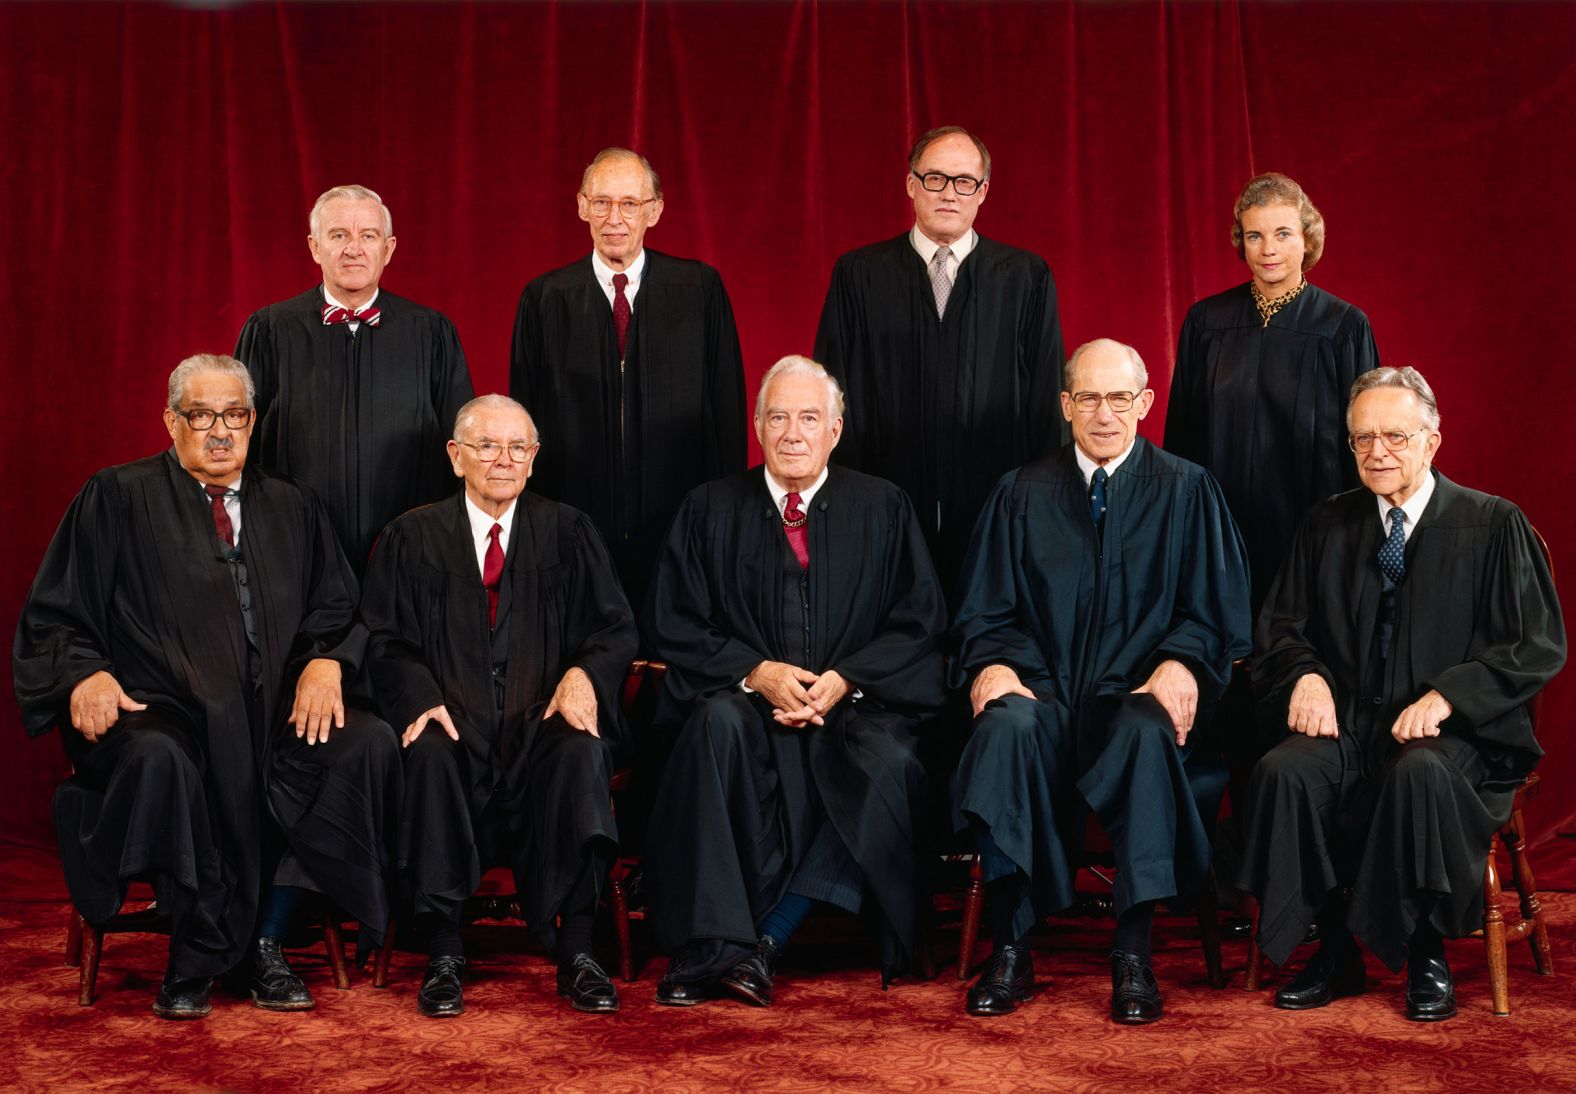 O'Connor poses with other Supreme Court justices for an official photo in 1982. With O'Connor in the back row, from left, are John Paul Stevens, Lewis F. Powell Jr. and William Rehnquist. In the front row, from left, are Thurgood Marshall, William J. Brennan Jr., Chief Justice Warren Burger, Byron White and Harry Blackmun.